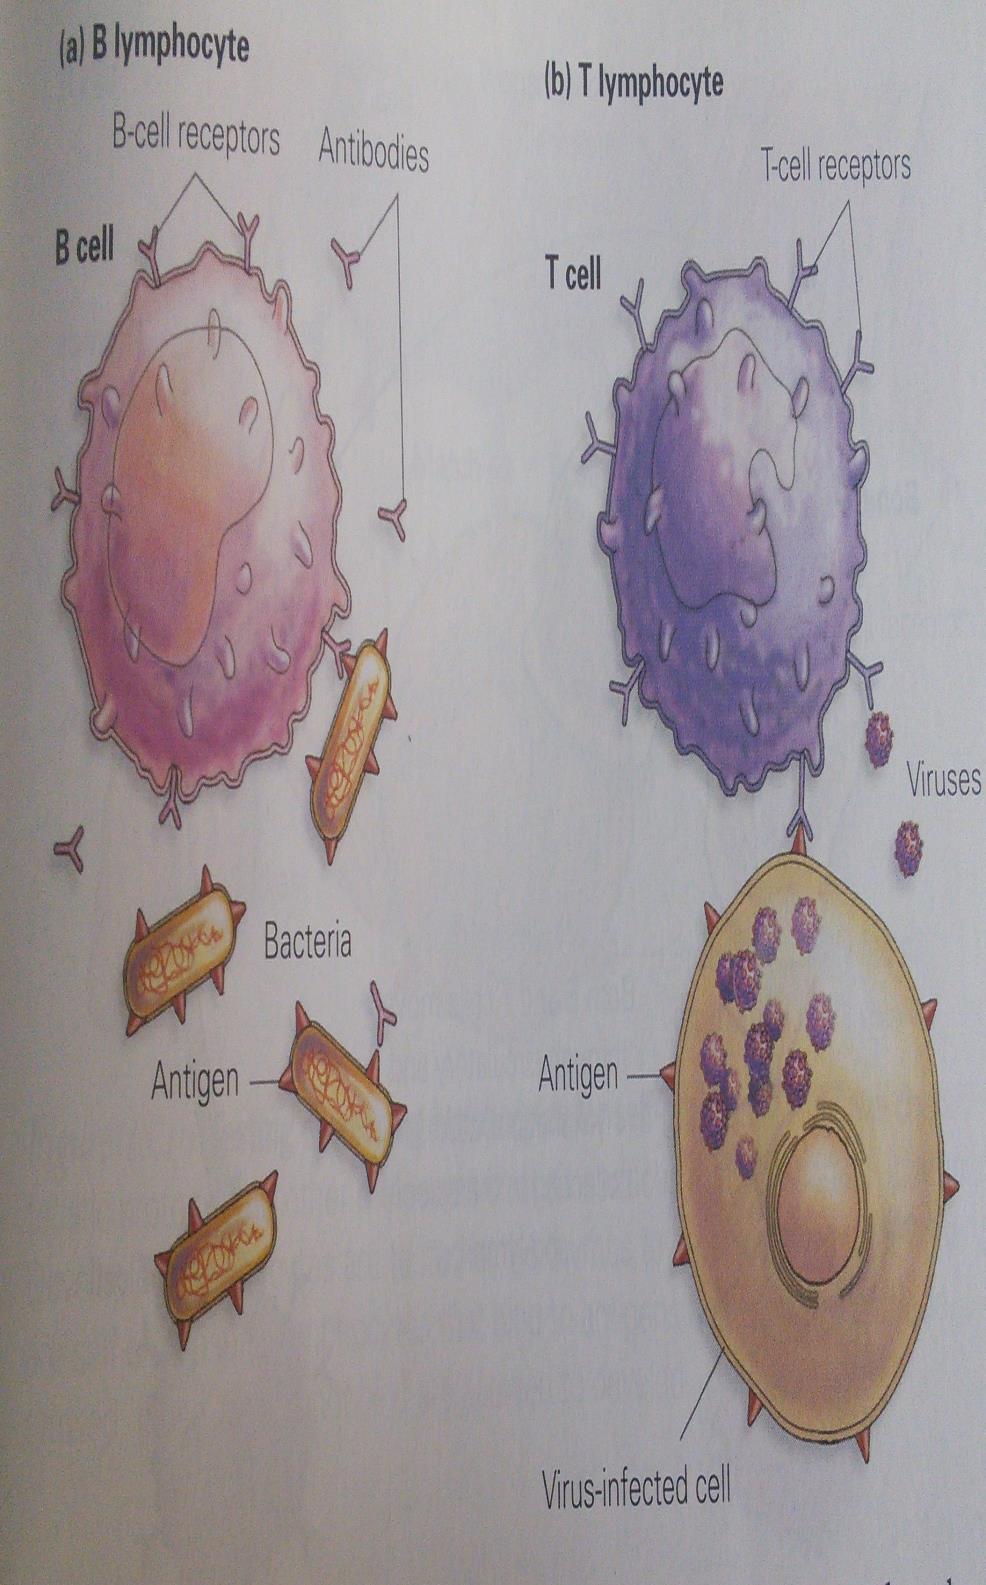 B cells and T cells When an antigen is in the body, two types of lymphocytes can be produced: the B lymphocytes (B